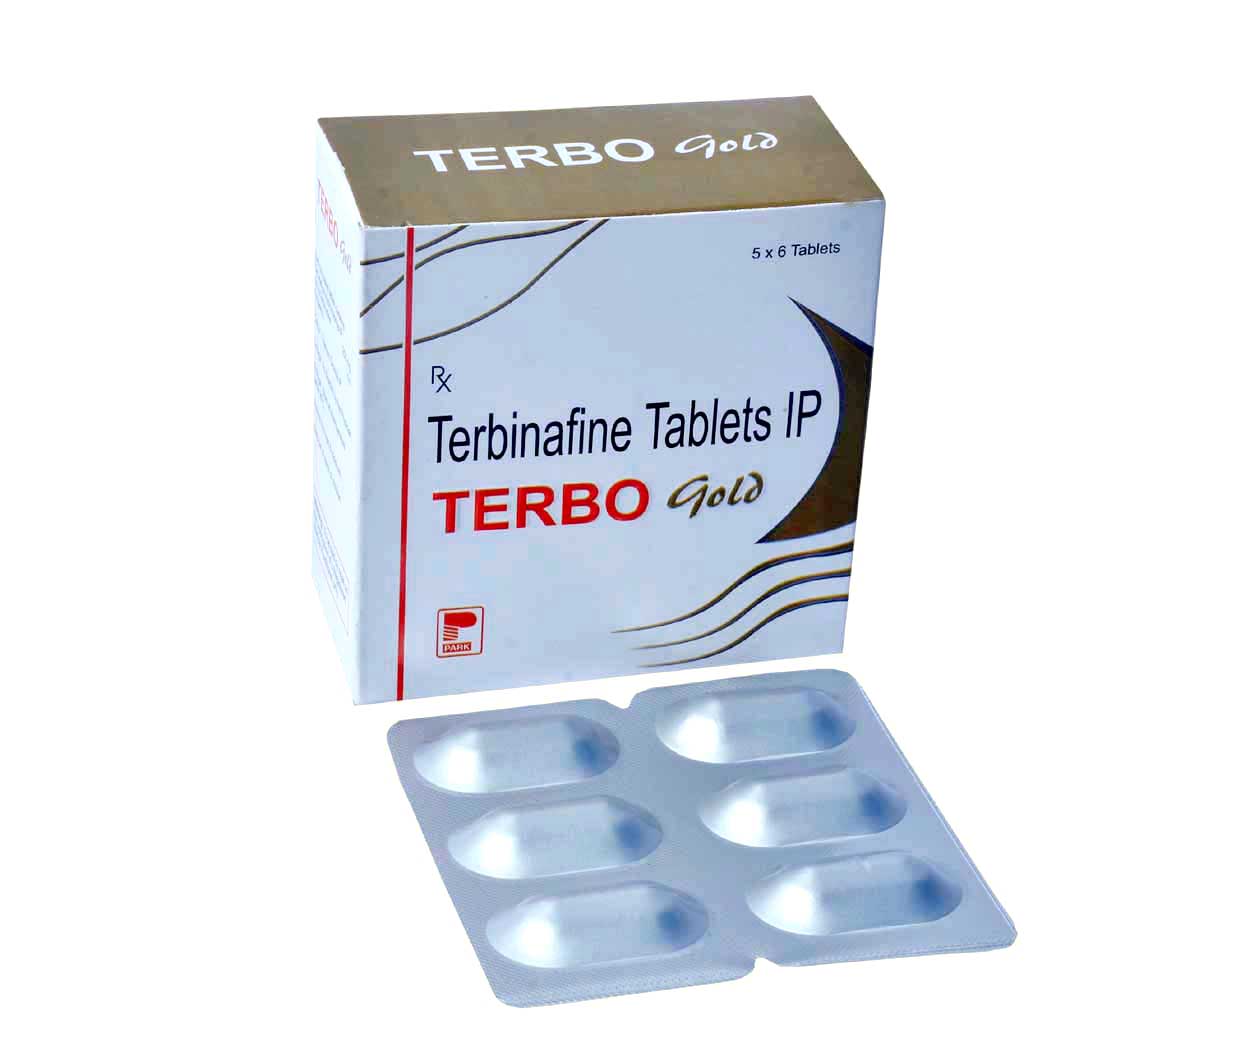 Product Name: TERBO Gold, Compositions of TERBO Gold are Terbinafine Tablets IP - Park Pharmaceuticals